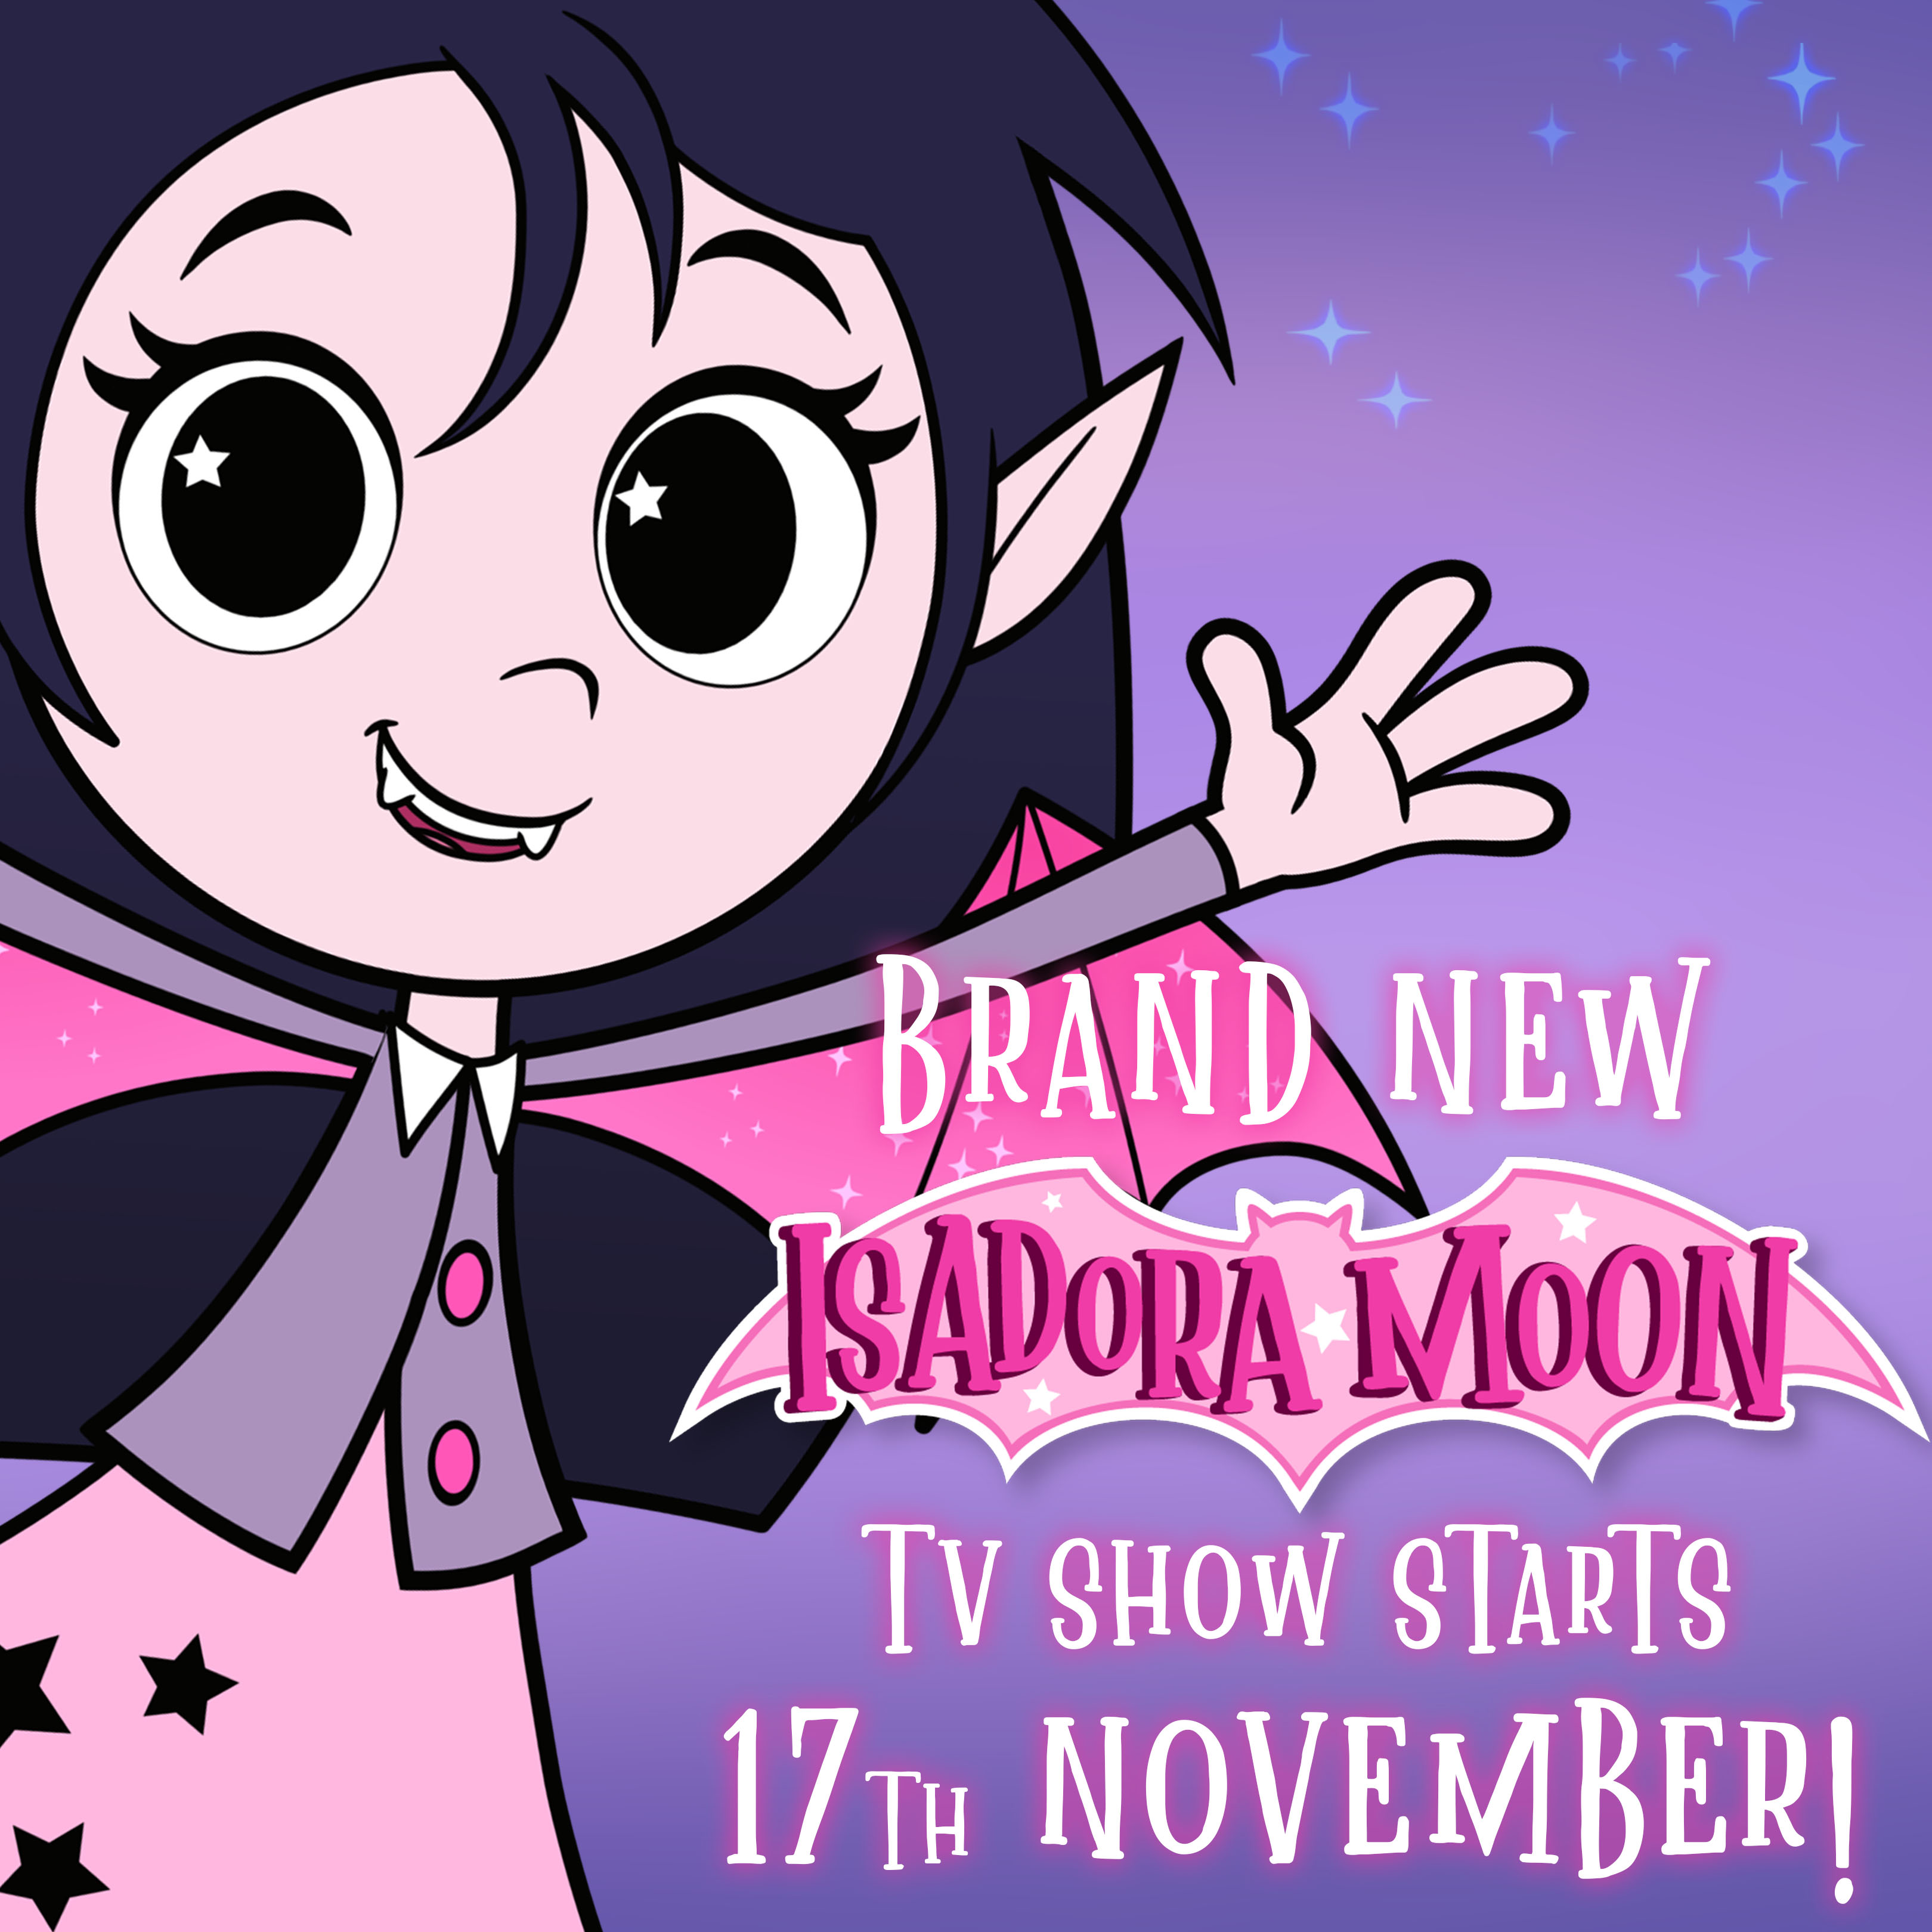 L&C Talent star in new animated TV series ‘Isadora Moon’